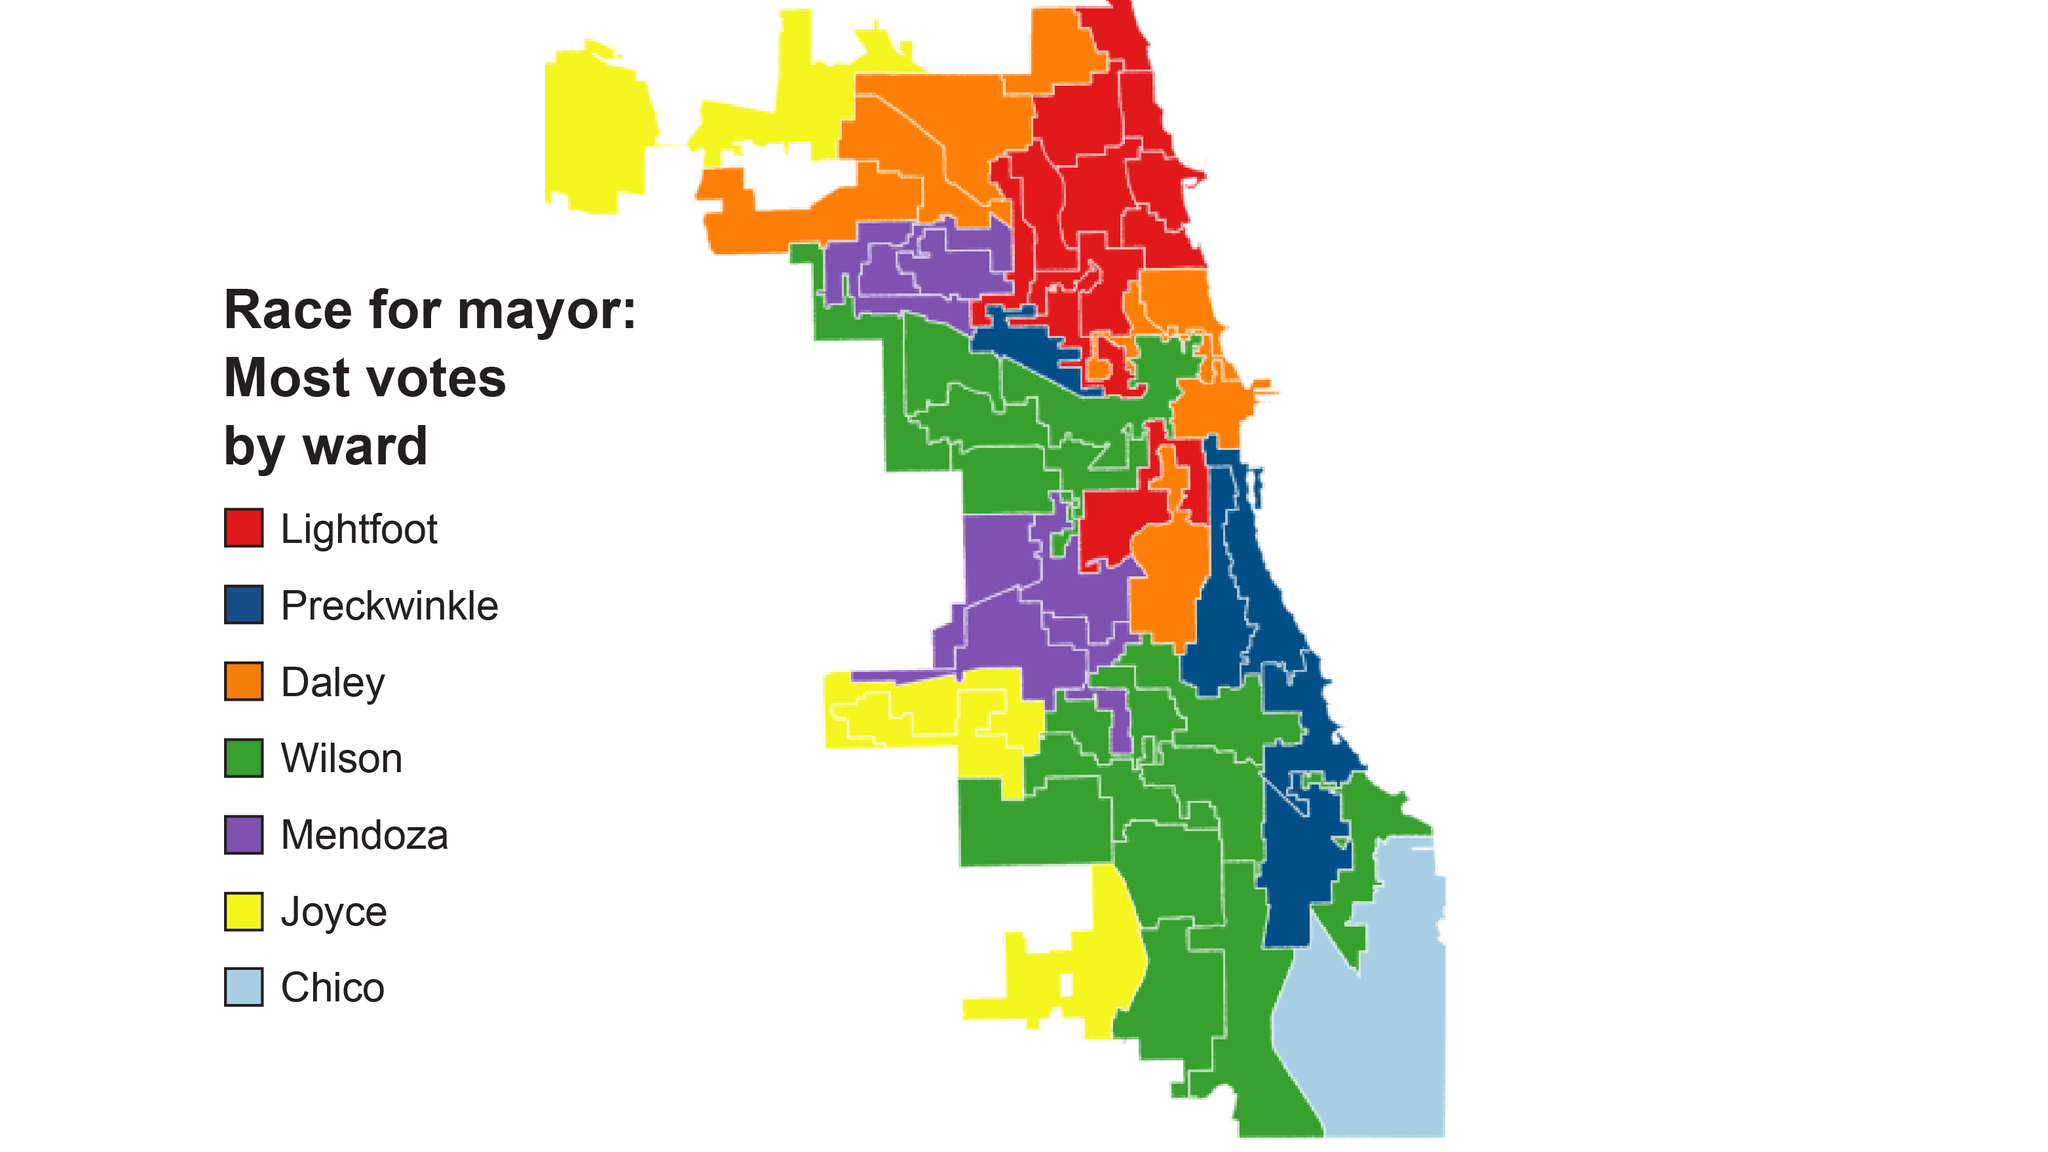 LINK How Did Your Ward Vote in the Municipal Election? VIEWS FROM